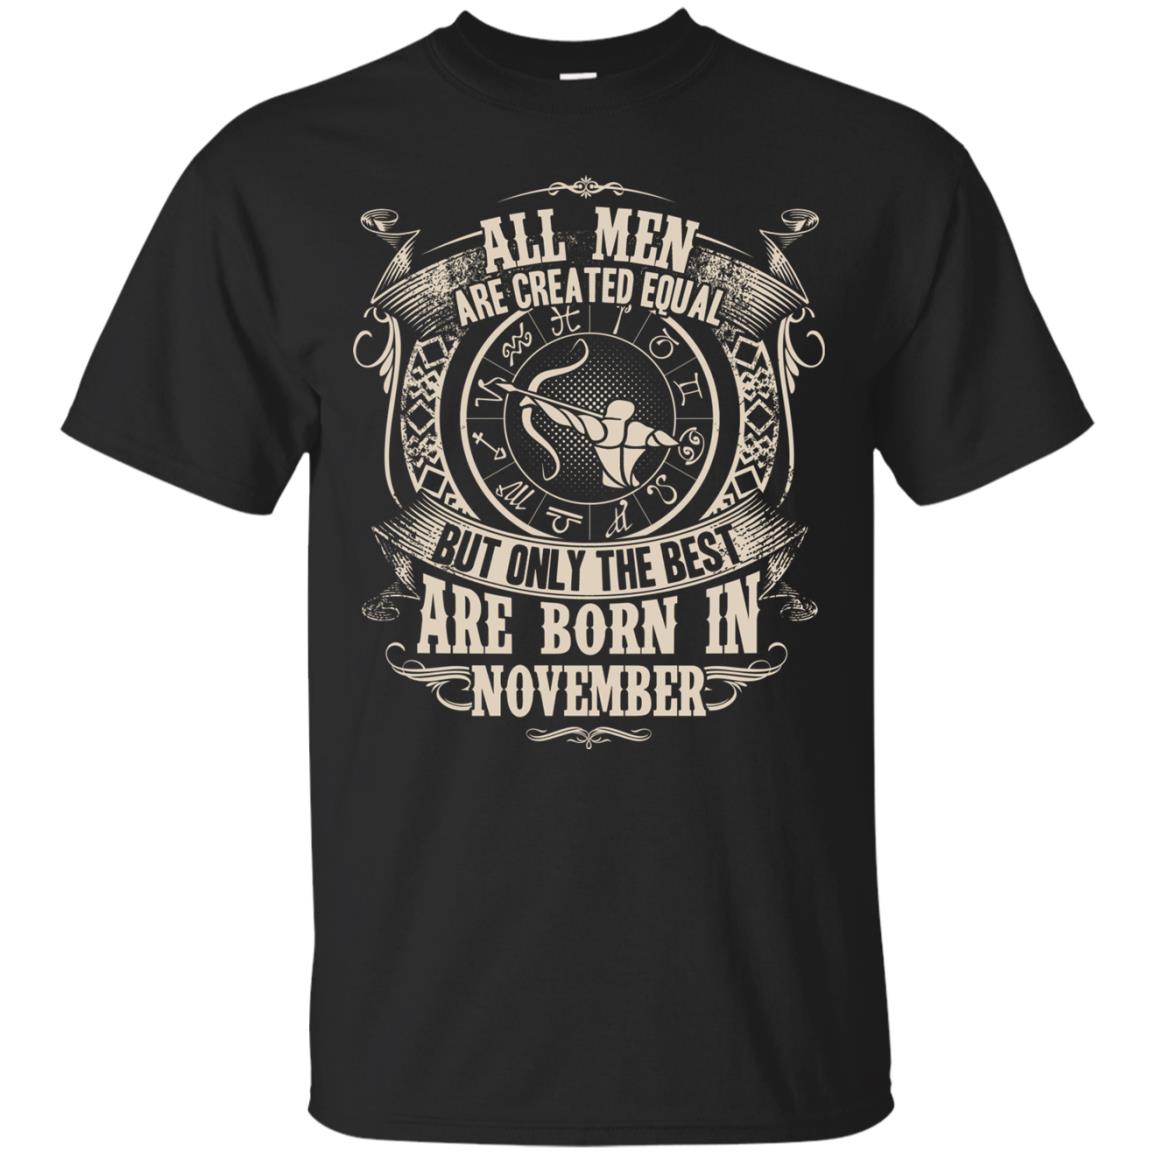 All Men Are Created Equal, But Only The Best Are Born In November T-shirtG200 Gildan Ultra Cotton T-Shirt